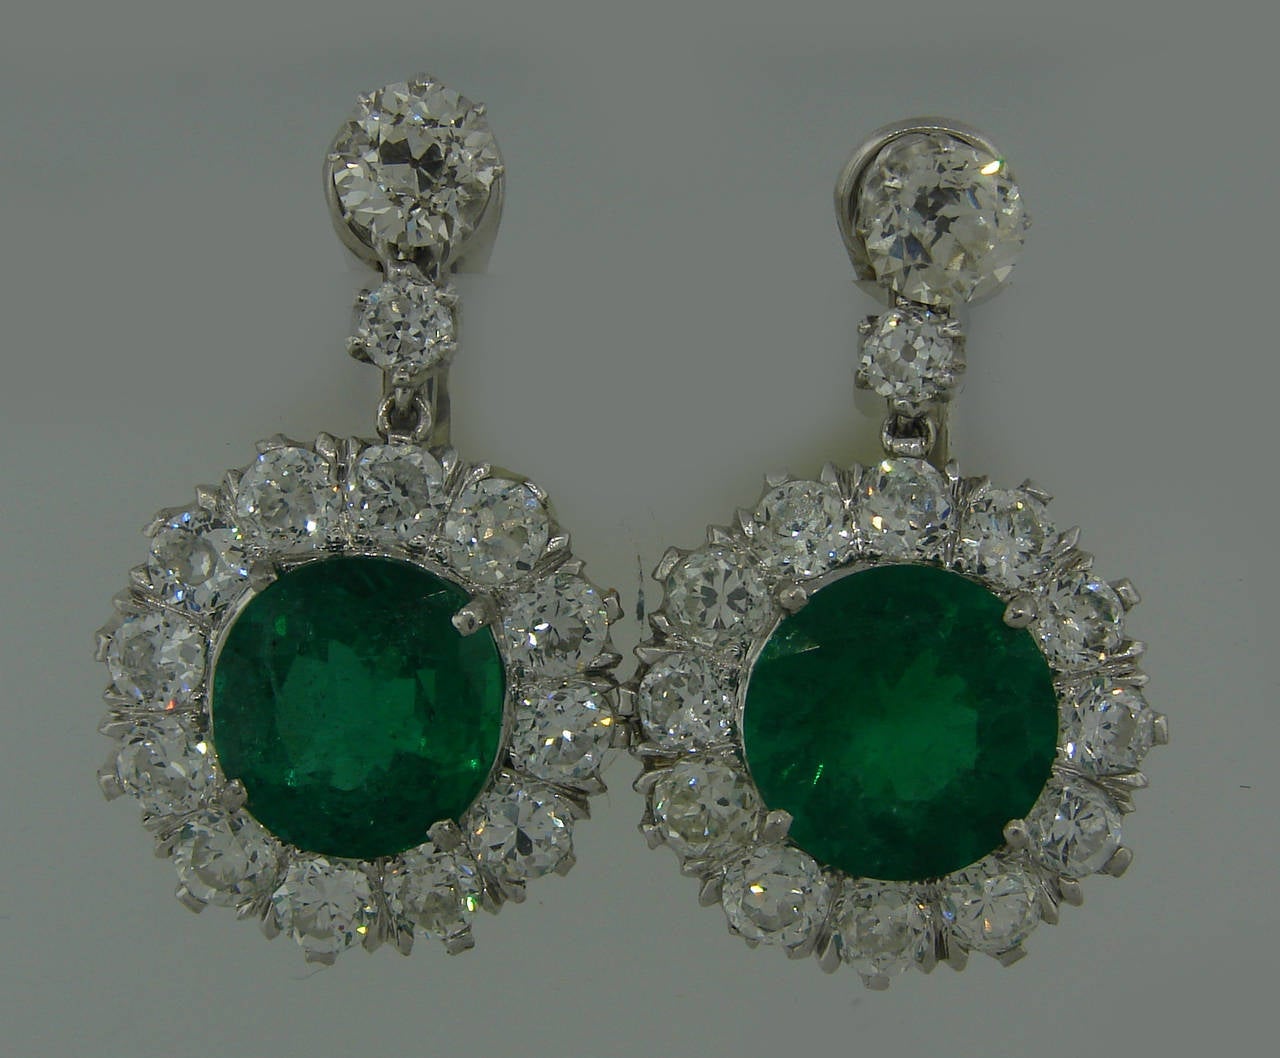 Magnificent dangle earrings created in the 1930's. Feature two natural Brazilian emeralds about 5 carats each set in platinum and surrounded with twenty eight Old European cut diamonds - total weight 3.28 carats. The emeralds are round faceted and